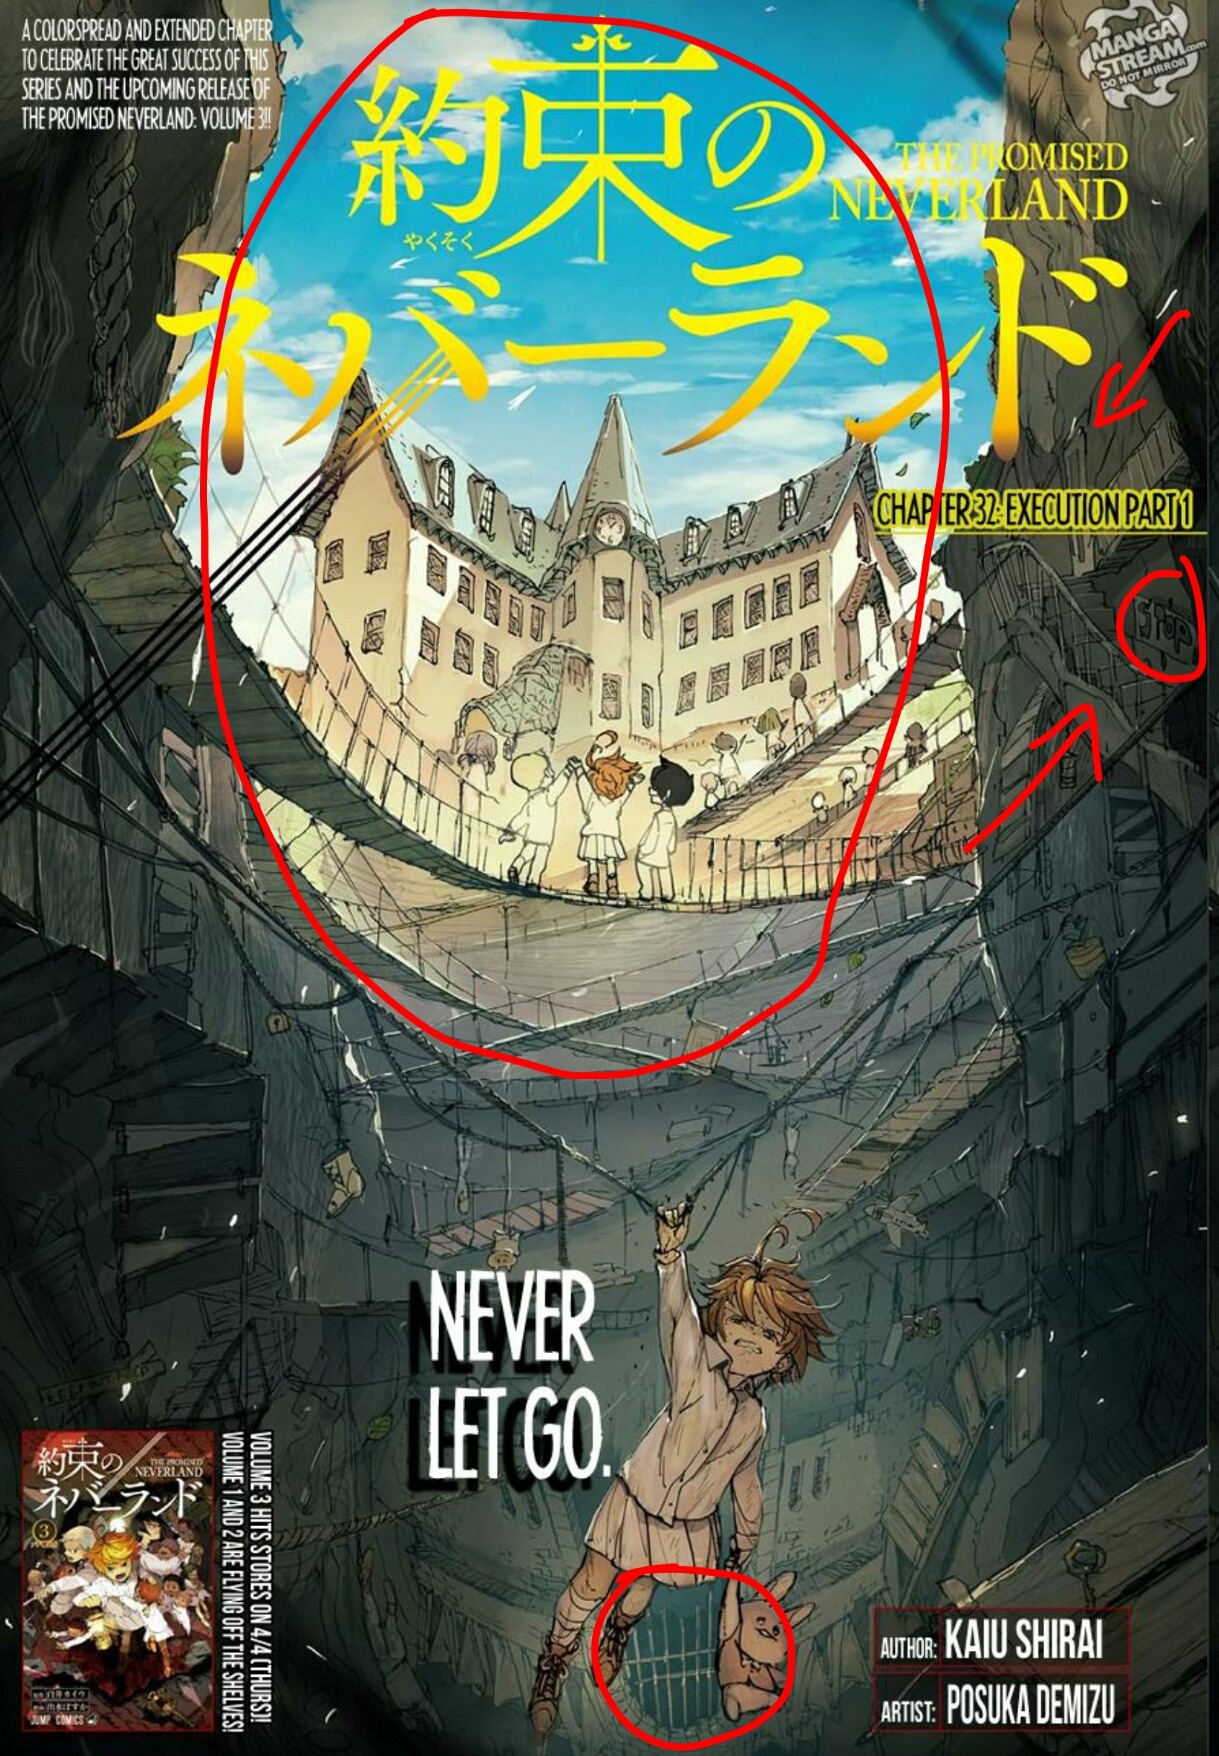 Here's Where to Start The Promised Neverland Manga After Finishing Season 1  - IGN